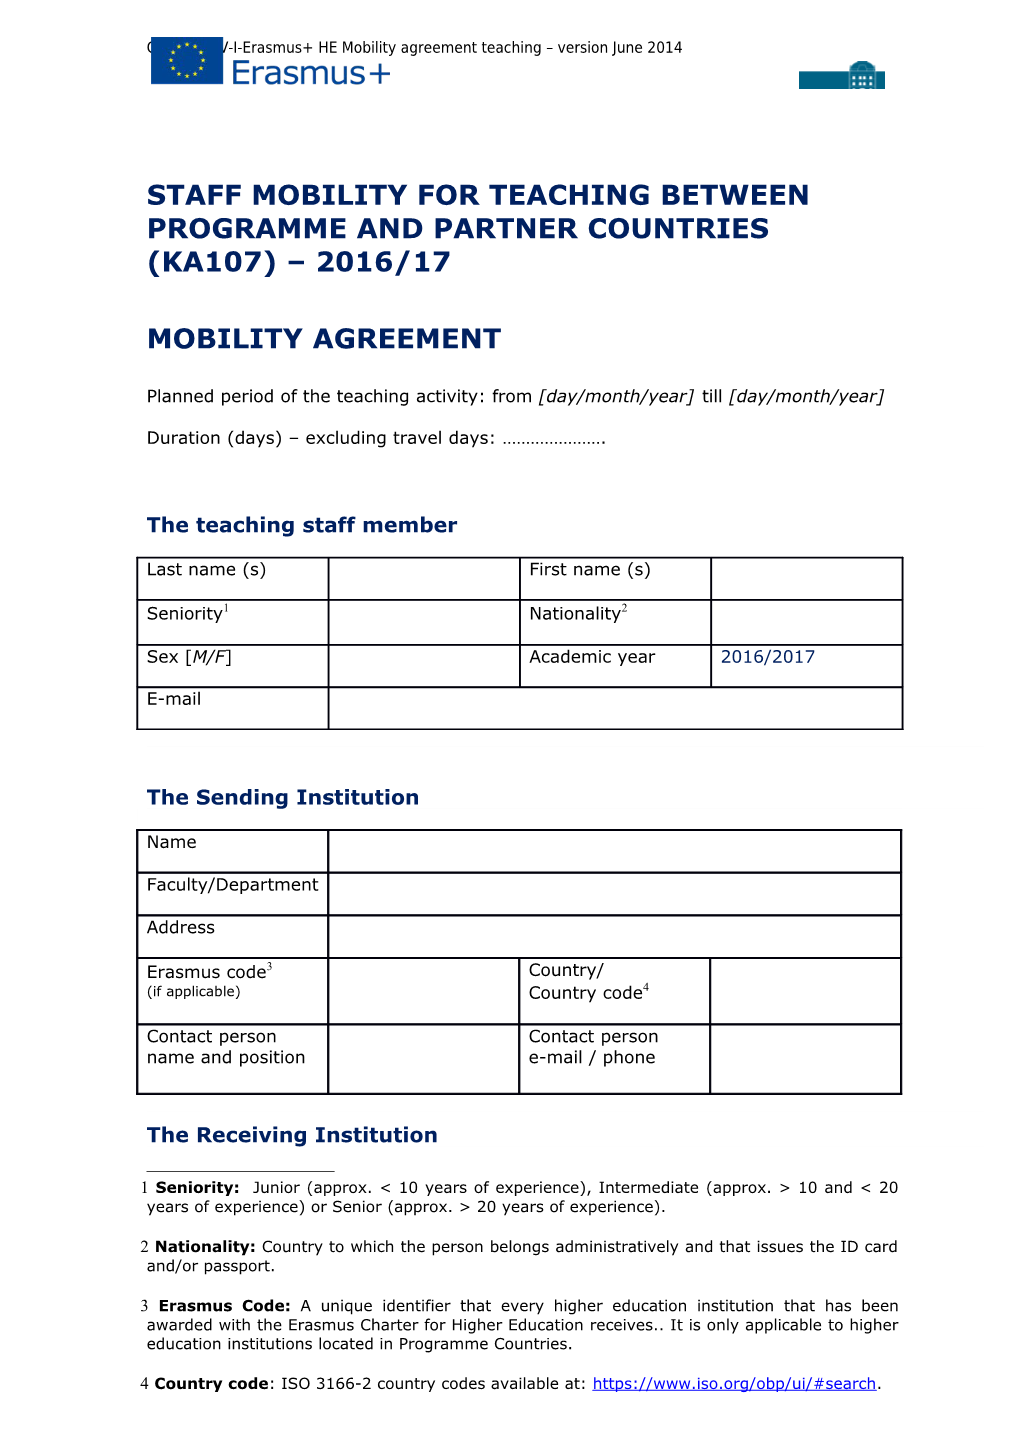 Staff Mobility for Teaching Between Programme and Partner Countries (Ka107) 2016/17